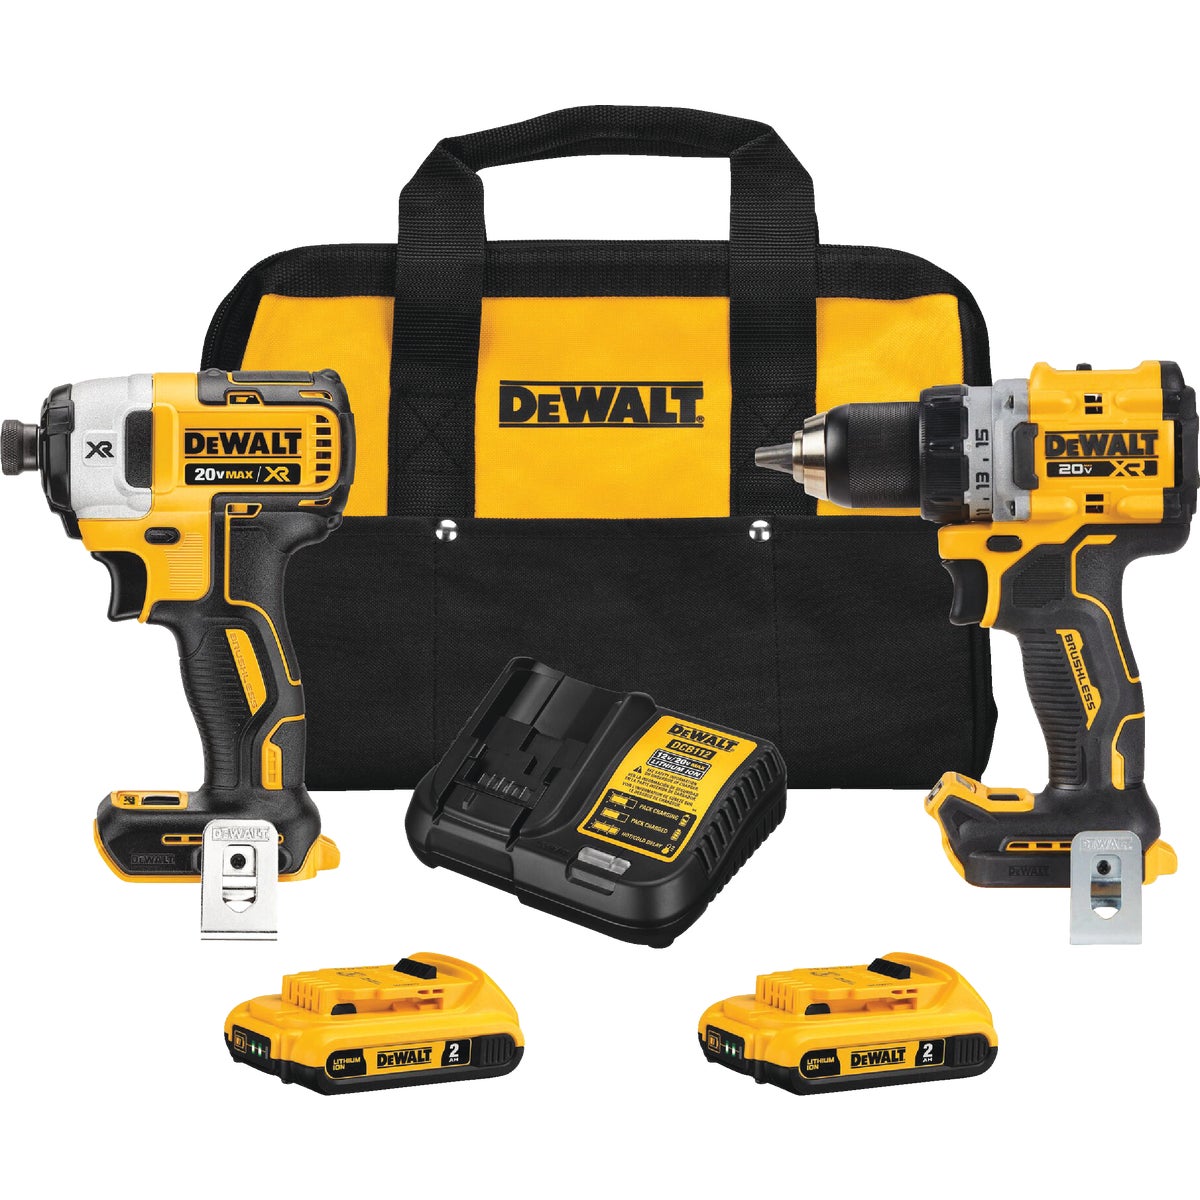 DEWALT 2-Tool 20V MAX XR Lithium-Ion Brushless Drill/Driver & Impact Driver Cordless Tool Combo Kit